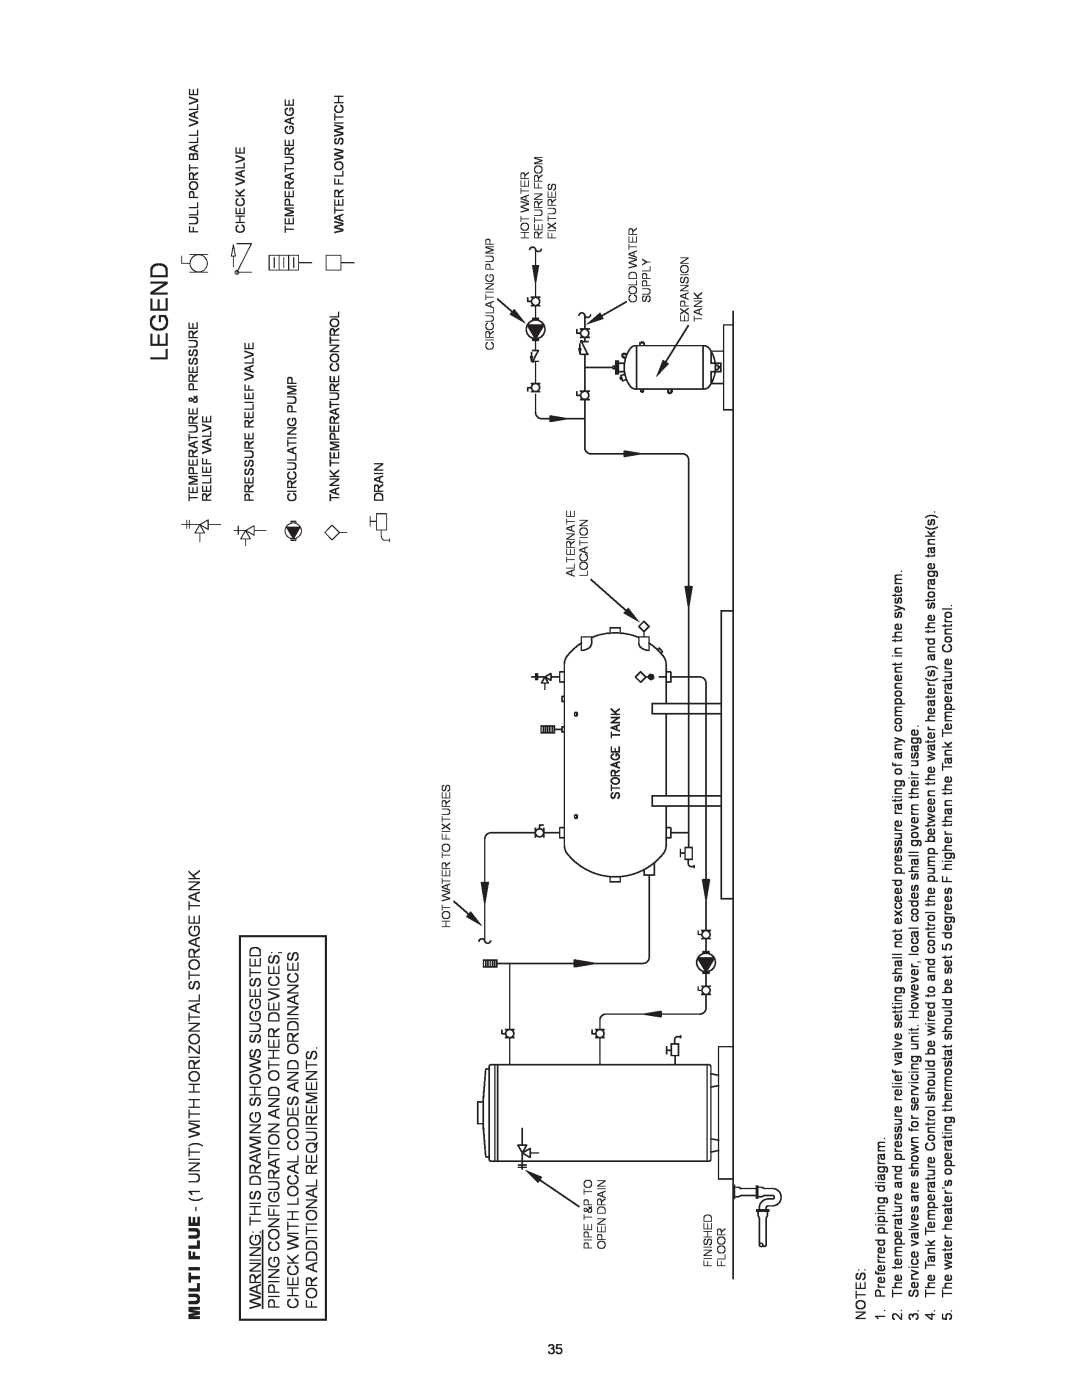 State Industries SBD85500PE MULTI FLUE - 1 UNIT WITH HORIZONTAL STORAGE TANK, Warning This Drawing Shows Suggested 